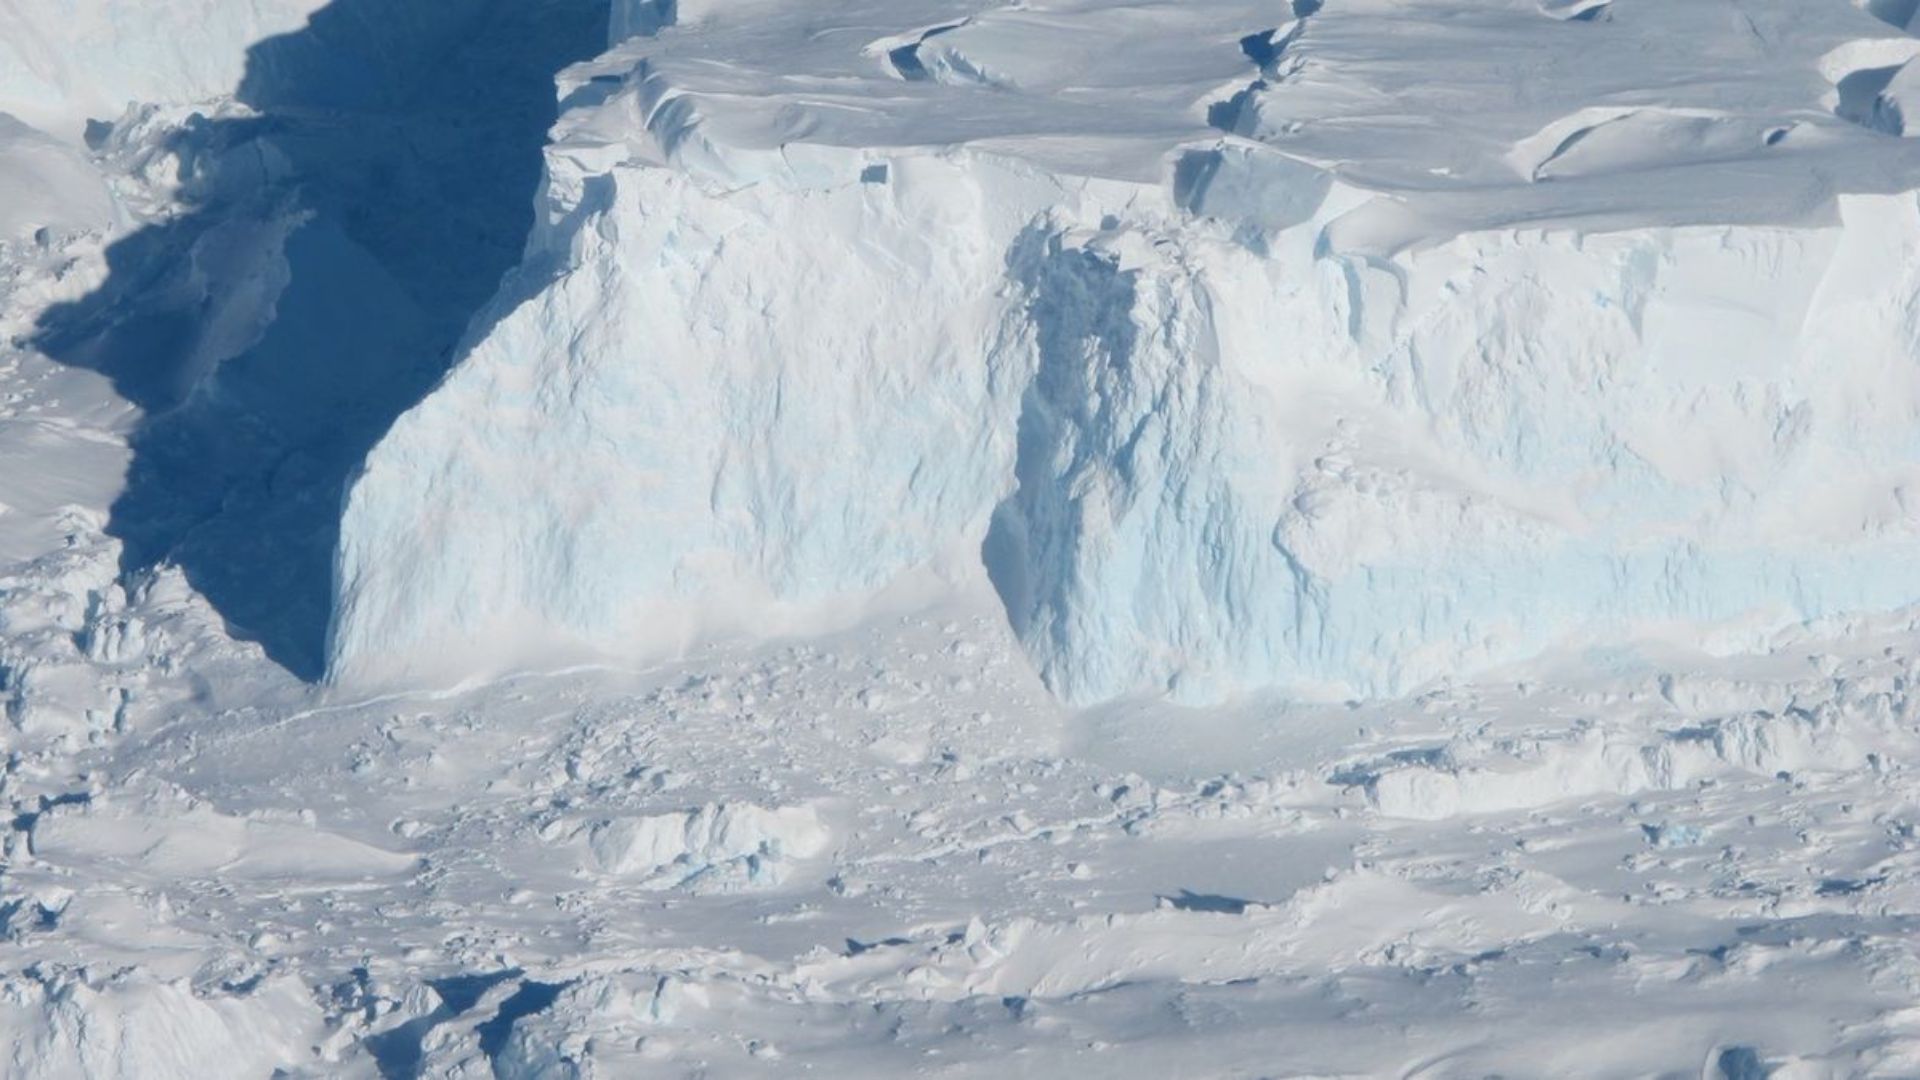 <p>Scientists involved with the studies at UC Irvine and the University of Waterloo argue that more funding is necessary to study the problem extensively.  </p> <p>Dow noted that with increased research, “ the models and focusing our research on these critical glaciers, we will try to get these numbers at least pinned down for decades versus centuries. This work will help people adapt to changing ocean levels, along with focusing on reducing carbon emissions to prevent the worst-case scenario.”    </p>